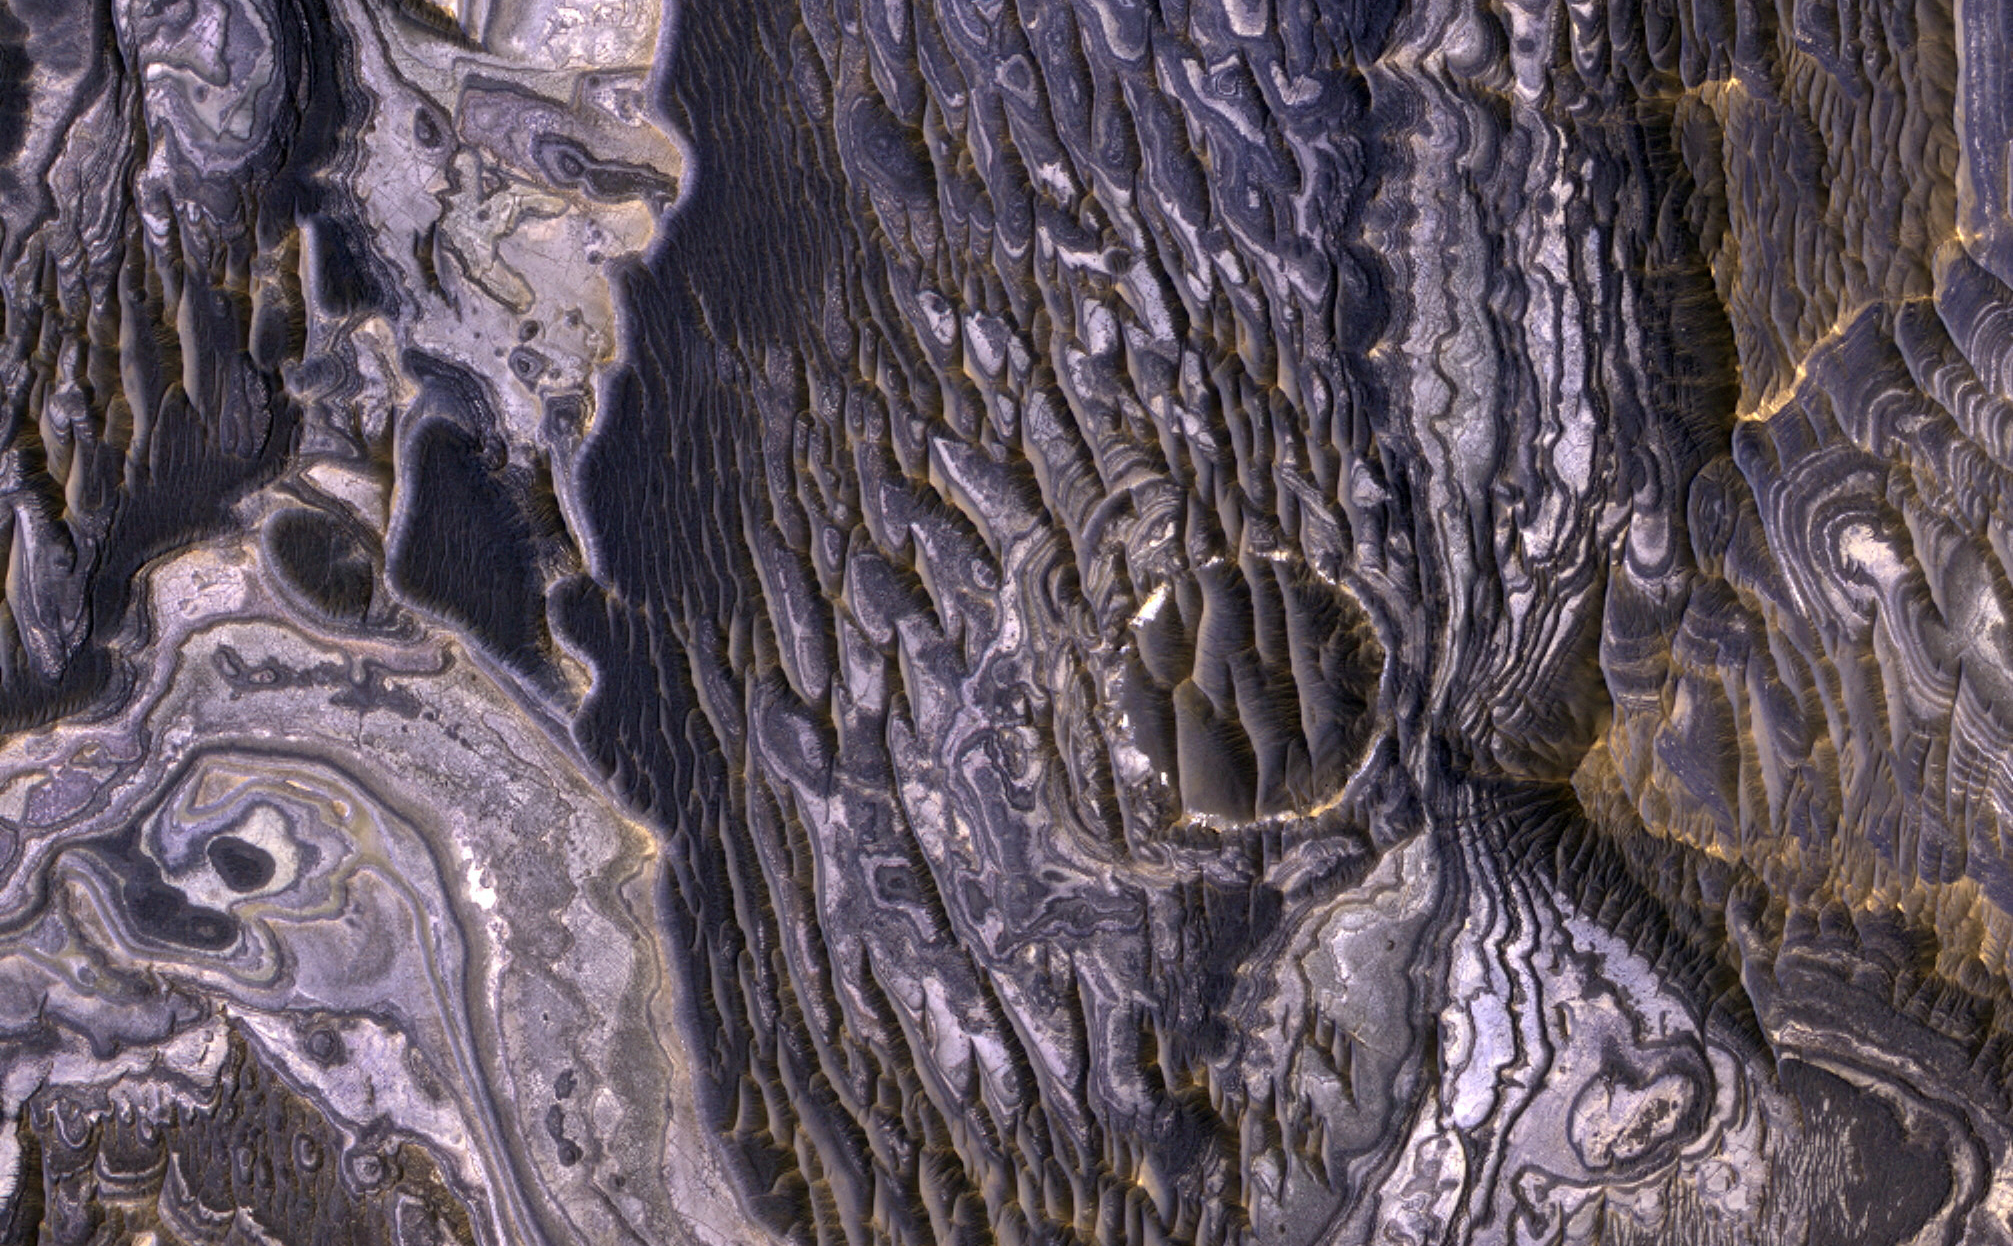 bright layered deposits on a plateau near Juventae Chasma in the Valles Marineris region of Mars